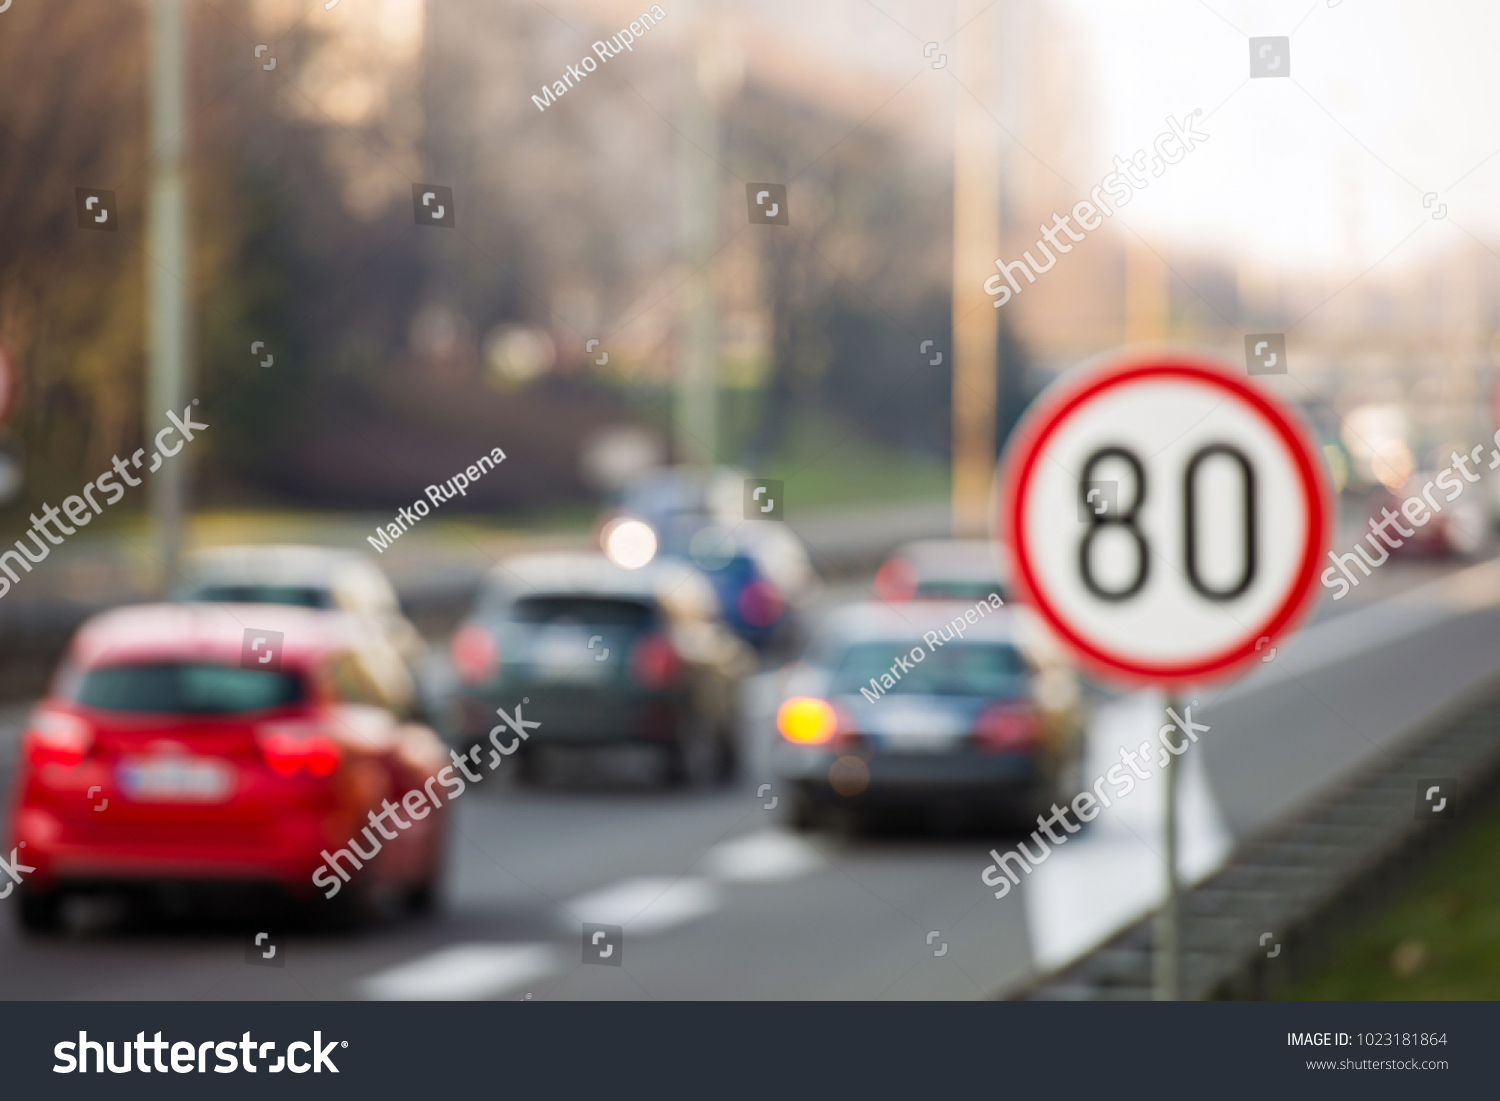 Defocused image of speed limit sign showing 80 km/h speed limit with a traffic in the background #1023181864